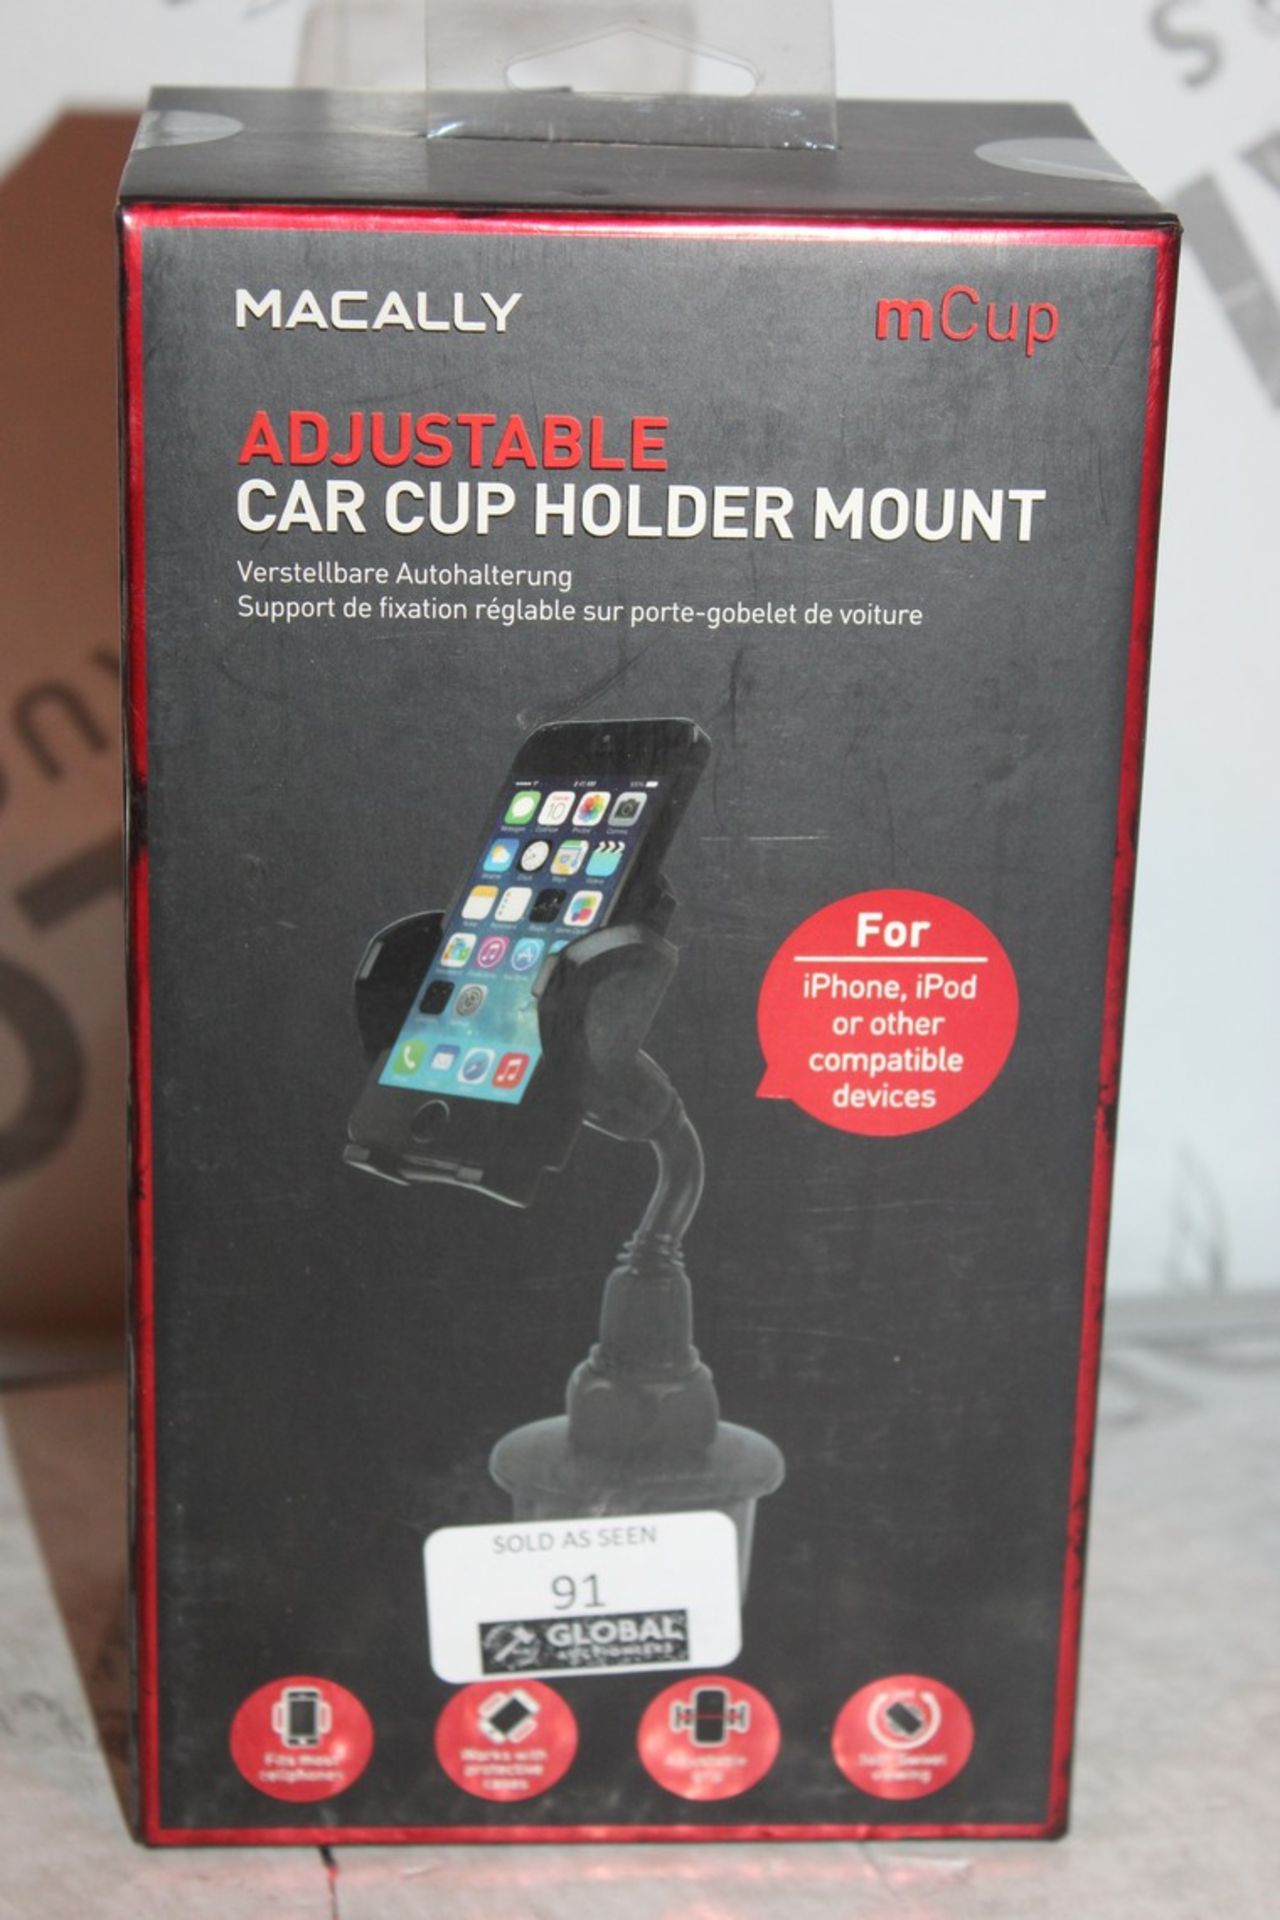 12 Boxed, Brand-New, Macally, M cup, Adjustable Car Mount Holders, Combined RRP£180.00